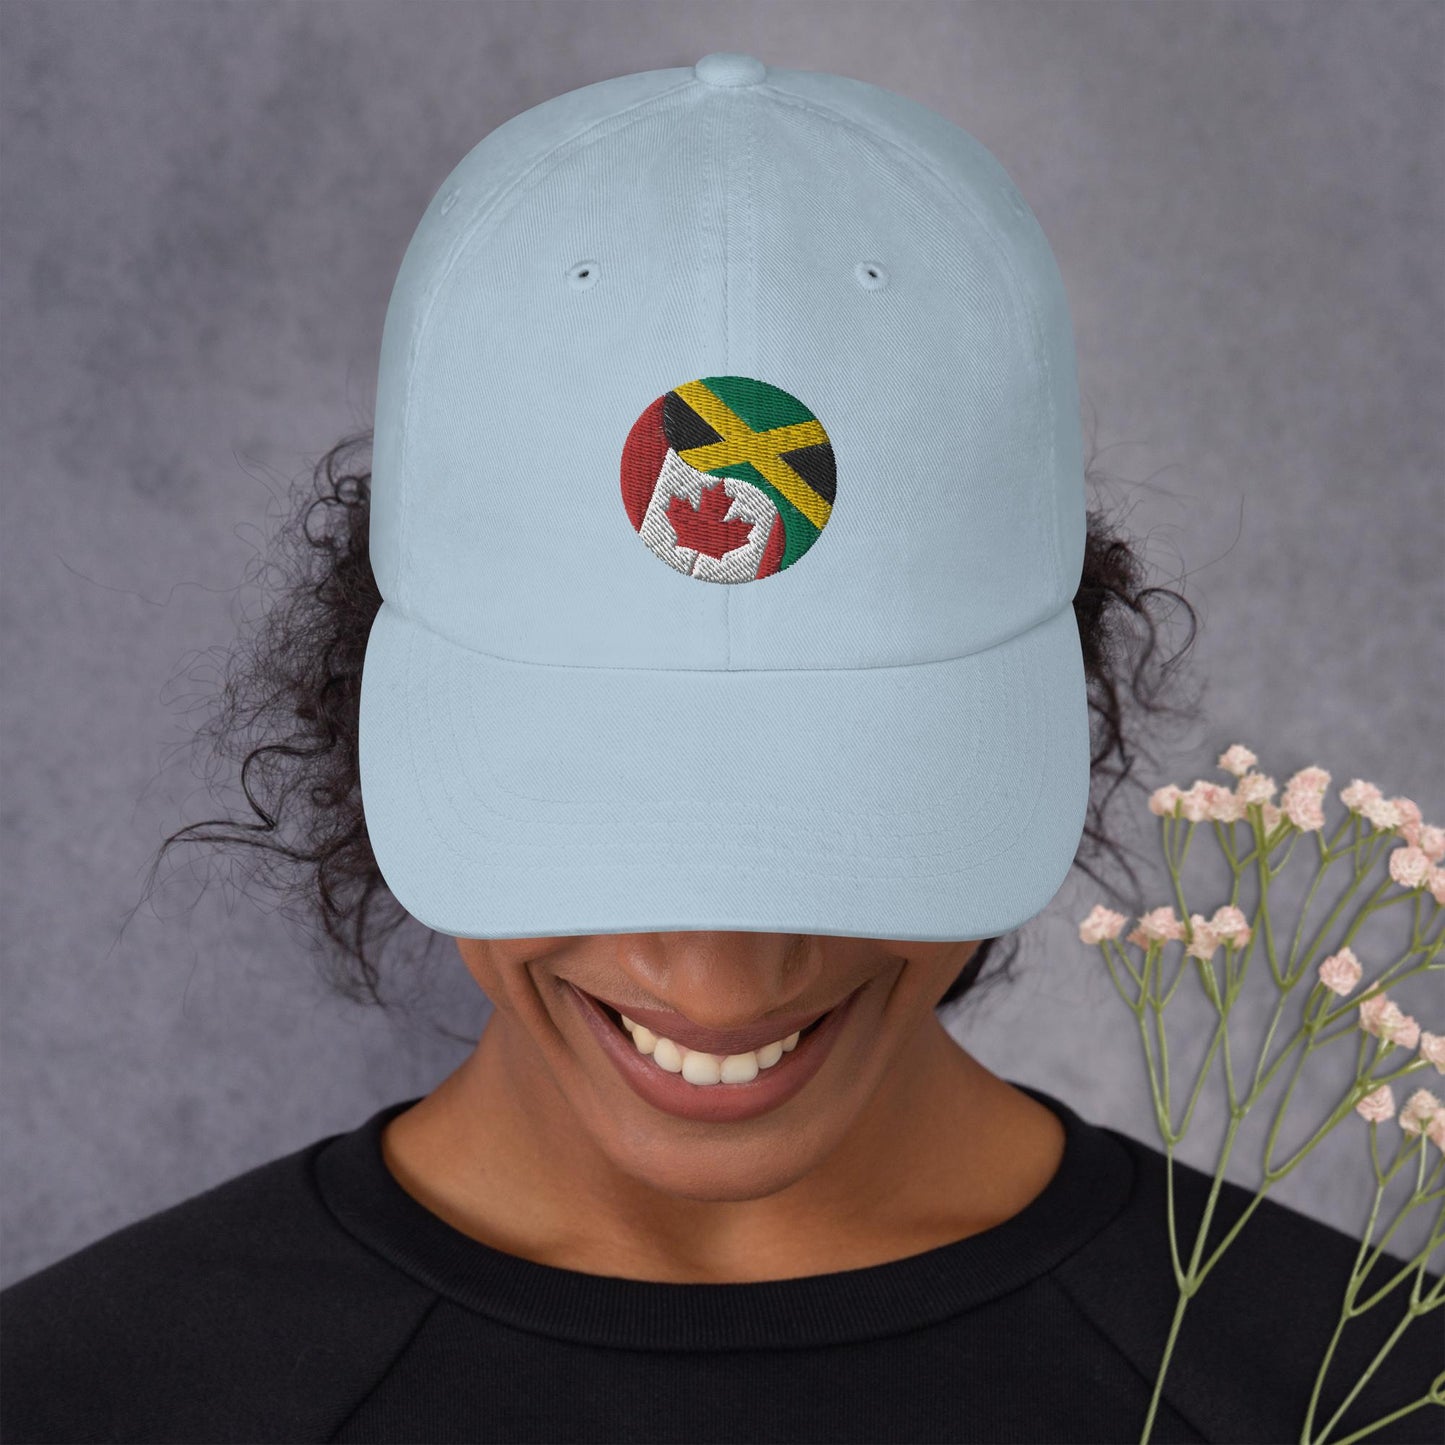 Jamaican-Can Pride hat